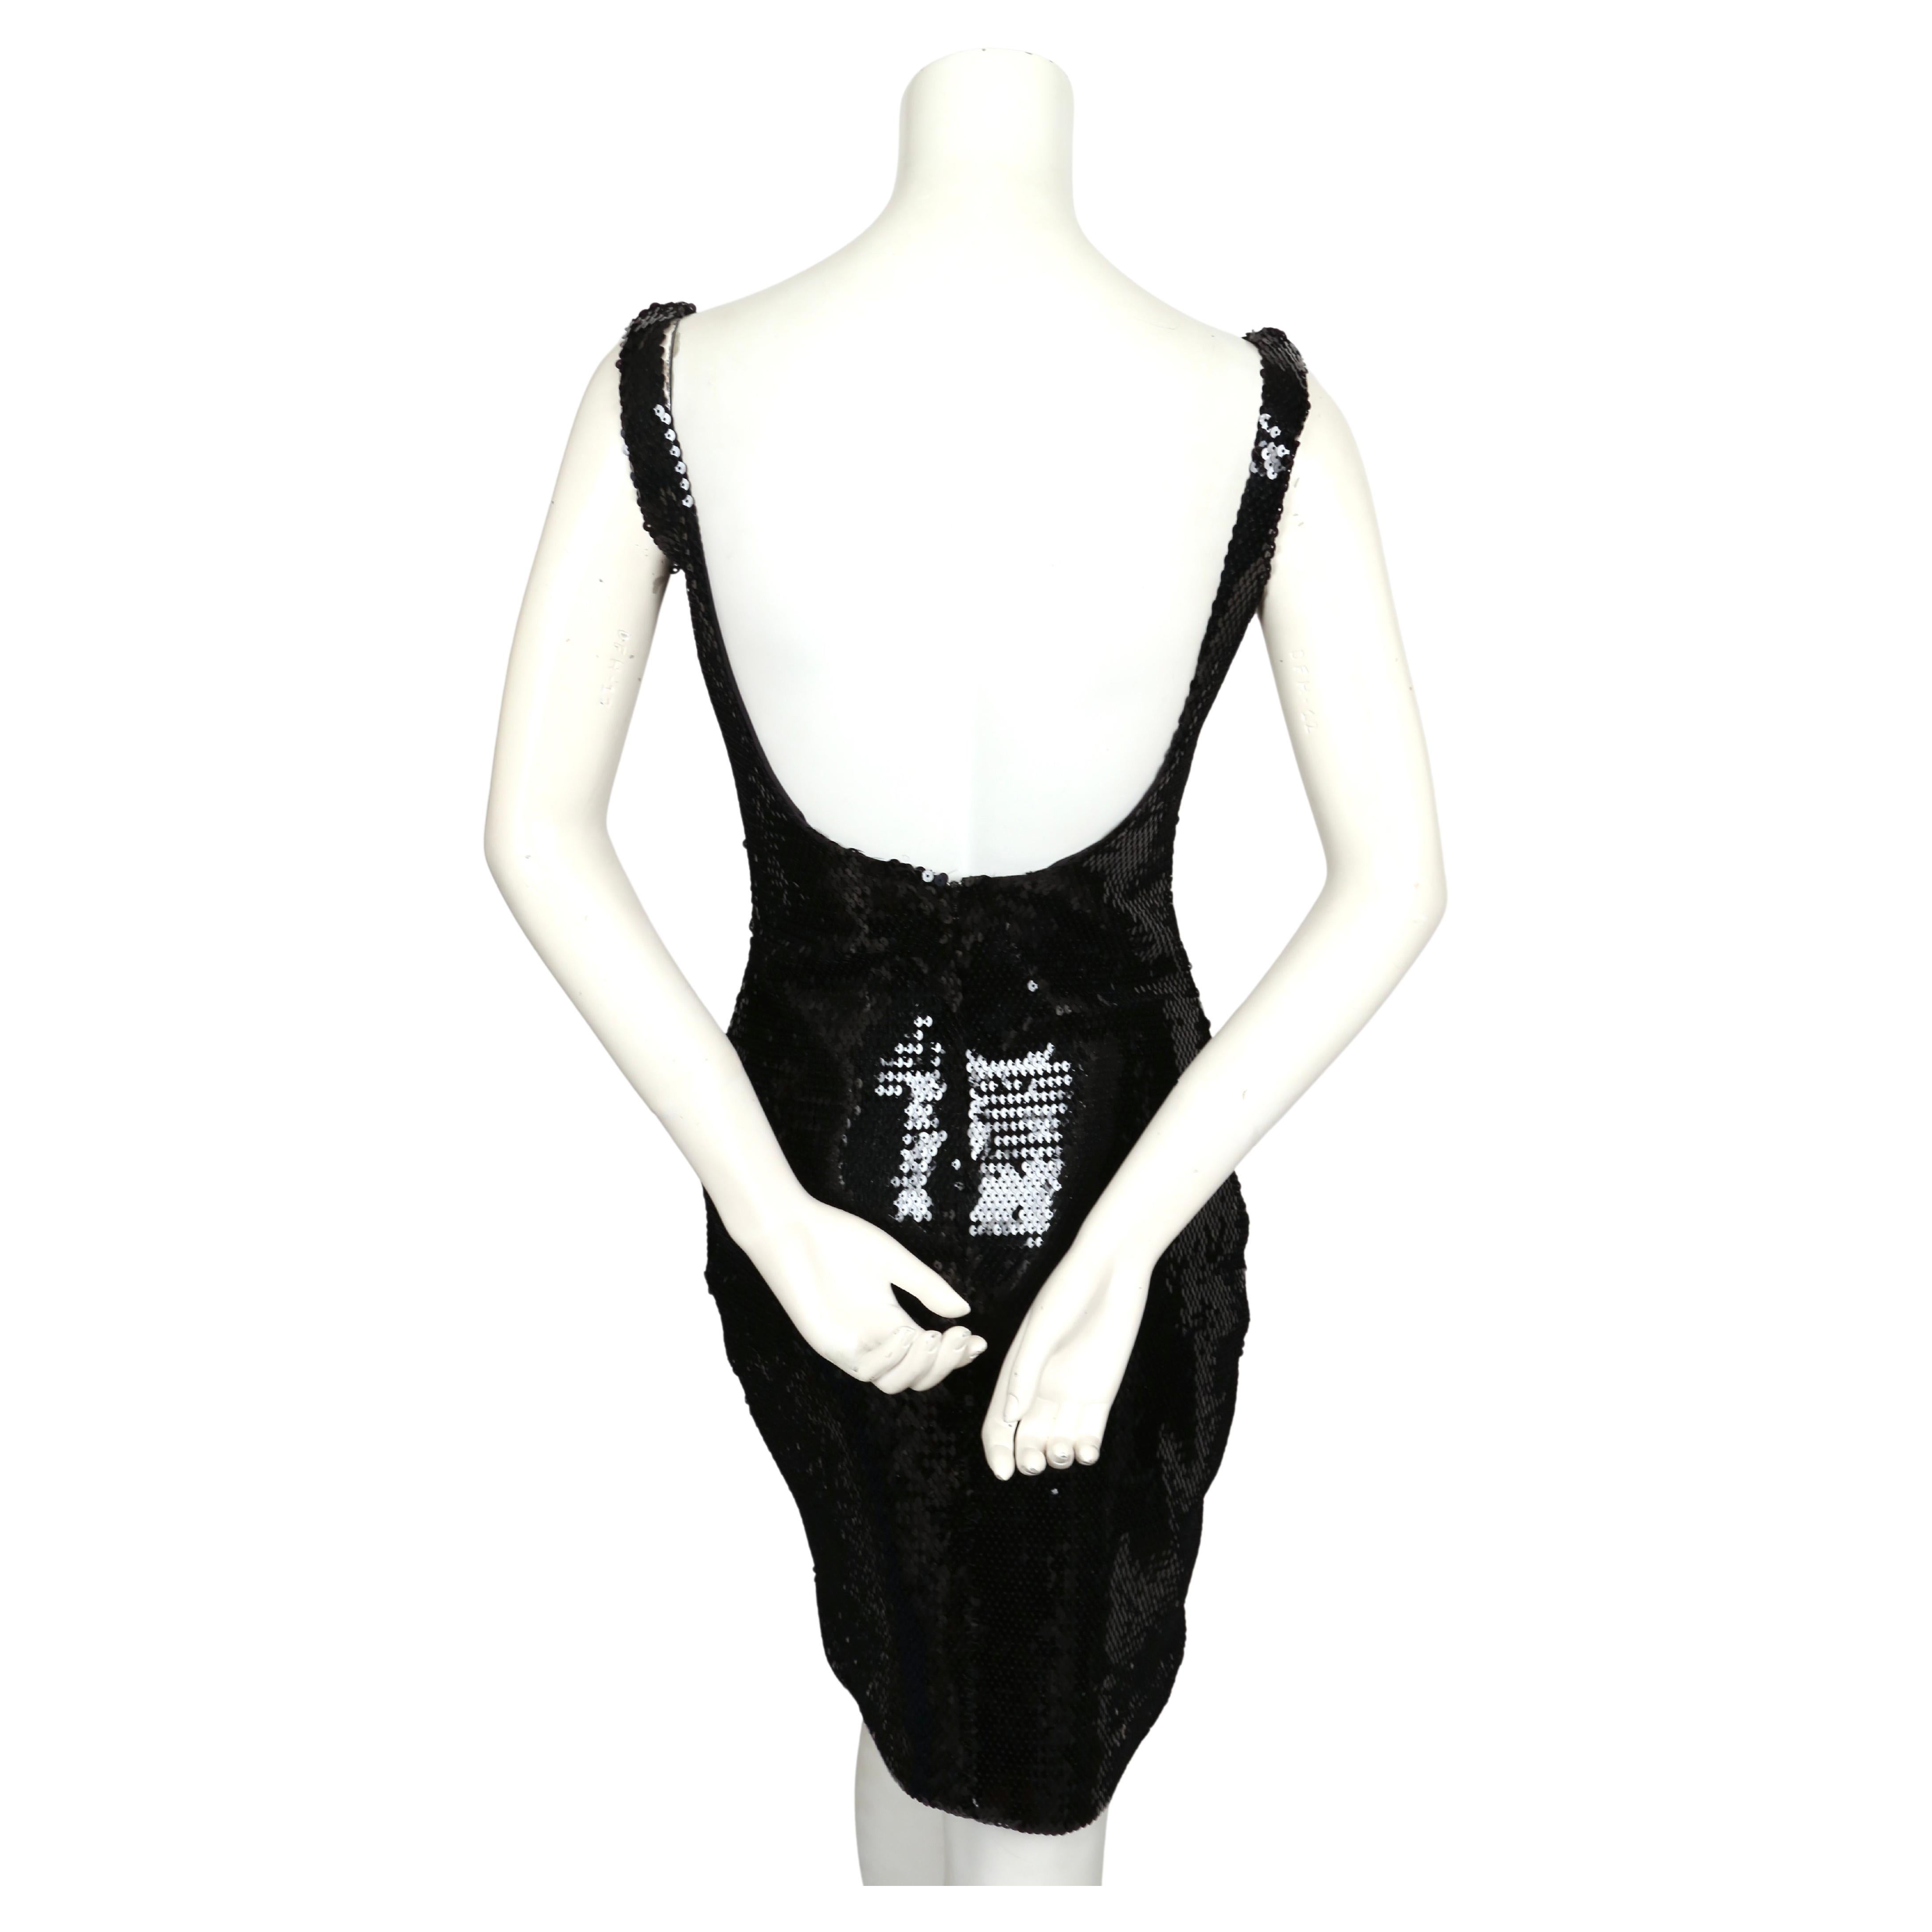 1988 STEPHEN SPROUSE black sequined dress For Sale 2